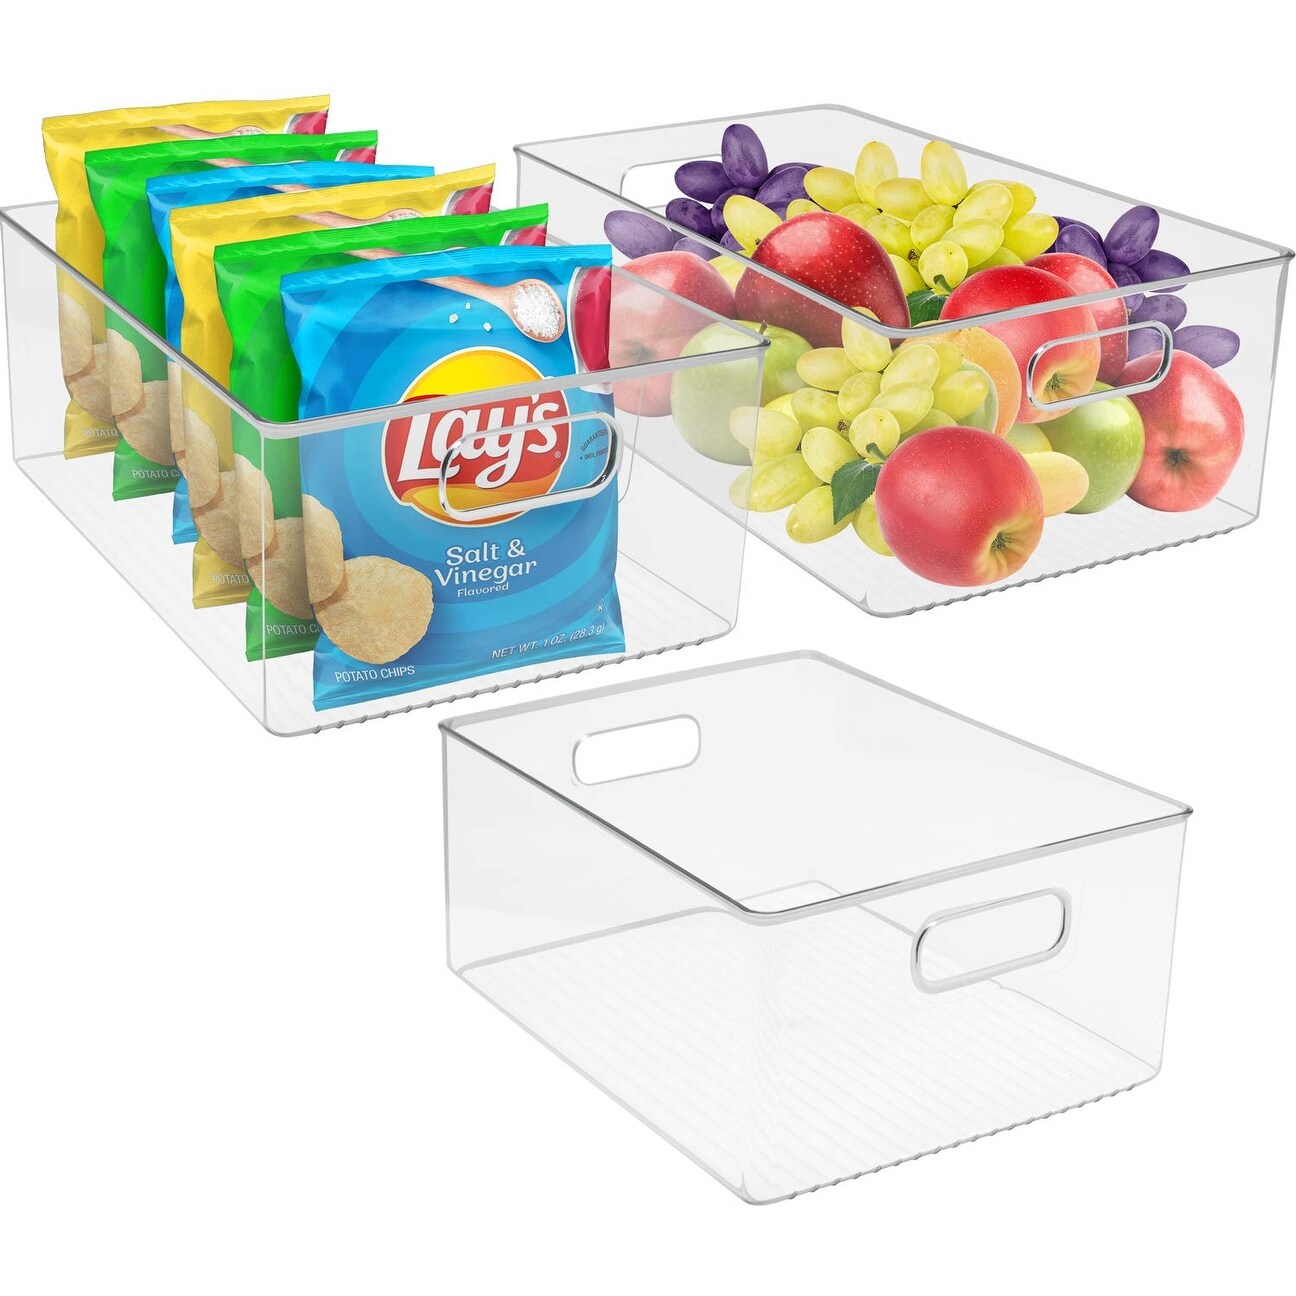 https://ak1.ostkcdn.com/images/products/is/images/direct/5cc6ec80b549fb1cee3d329d872587486a6bea79/Sorbus-Plastic-Storage-Bins-Clear-Pantry-Organizer-Box-Bin-Containers.jpg